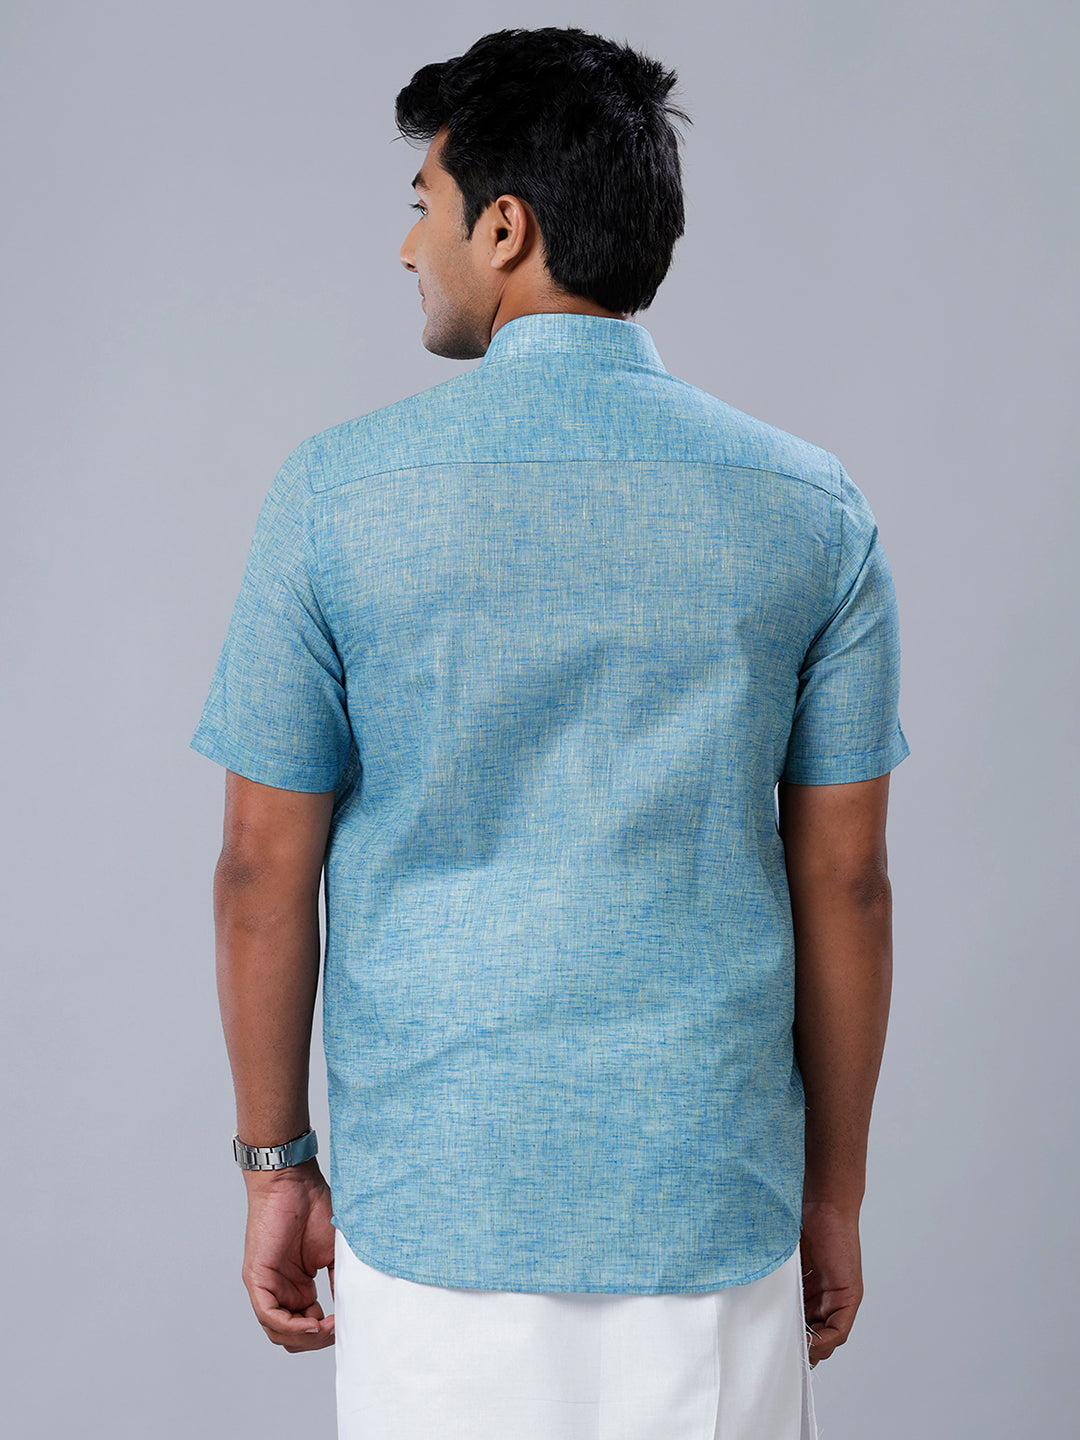 Mens Formal Shirt Half Sleeves Blue T39 TO5-Back view